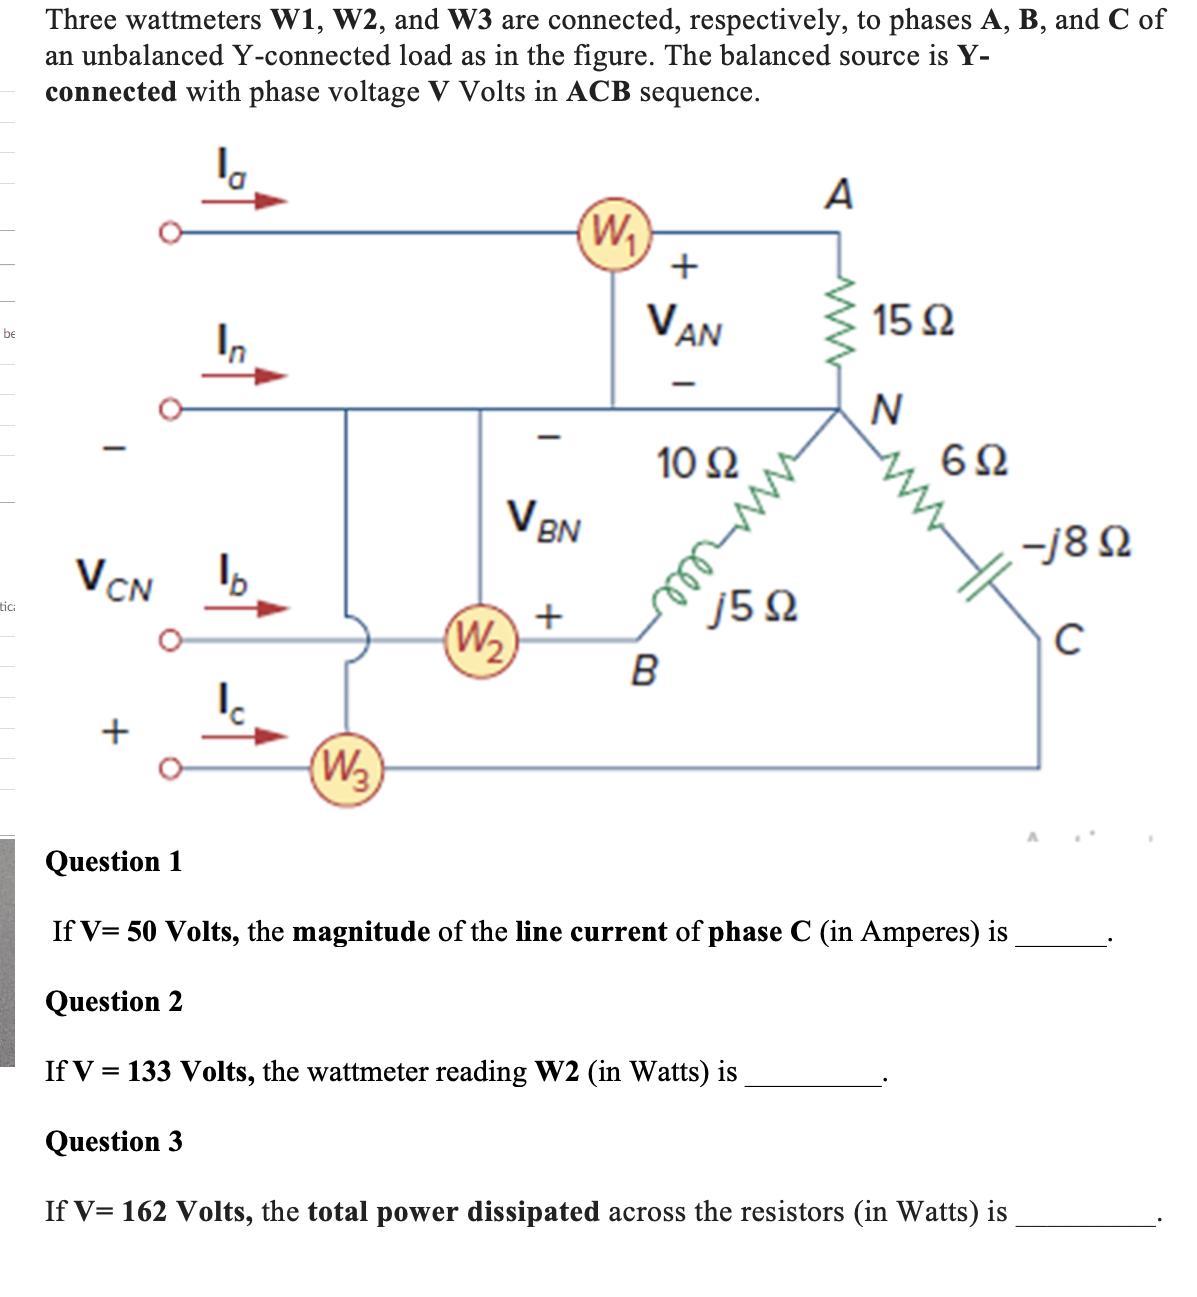 be tici Three wattmeters W1, W2, and W3 are connected, respectively, to phases A, B, and C of an unbalanced